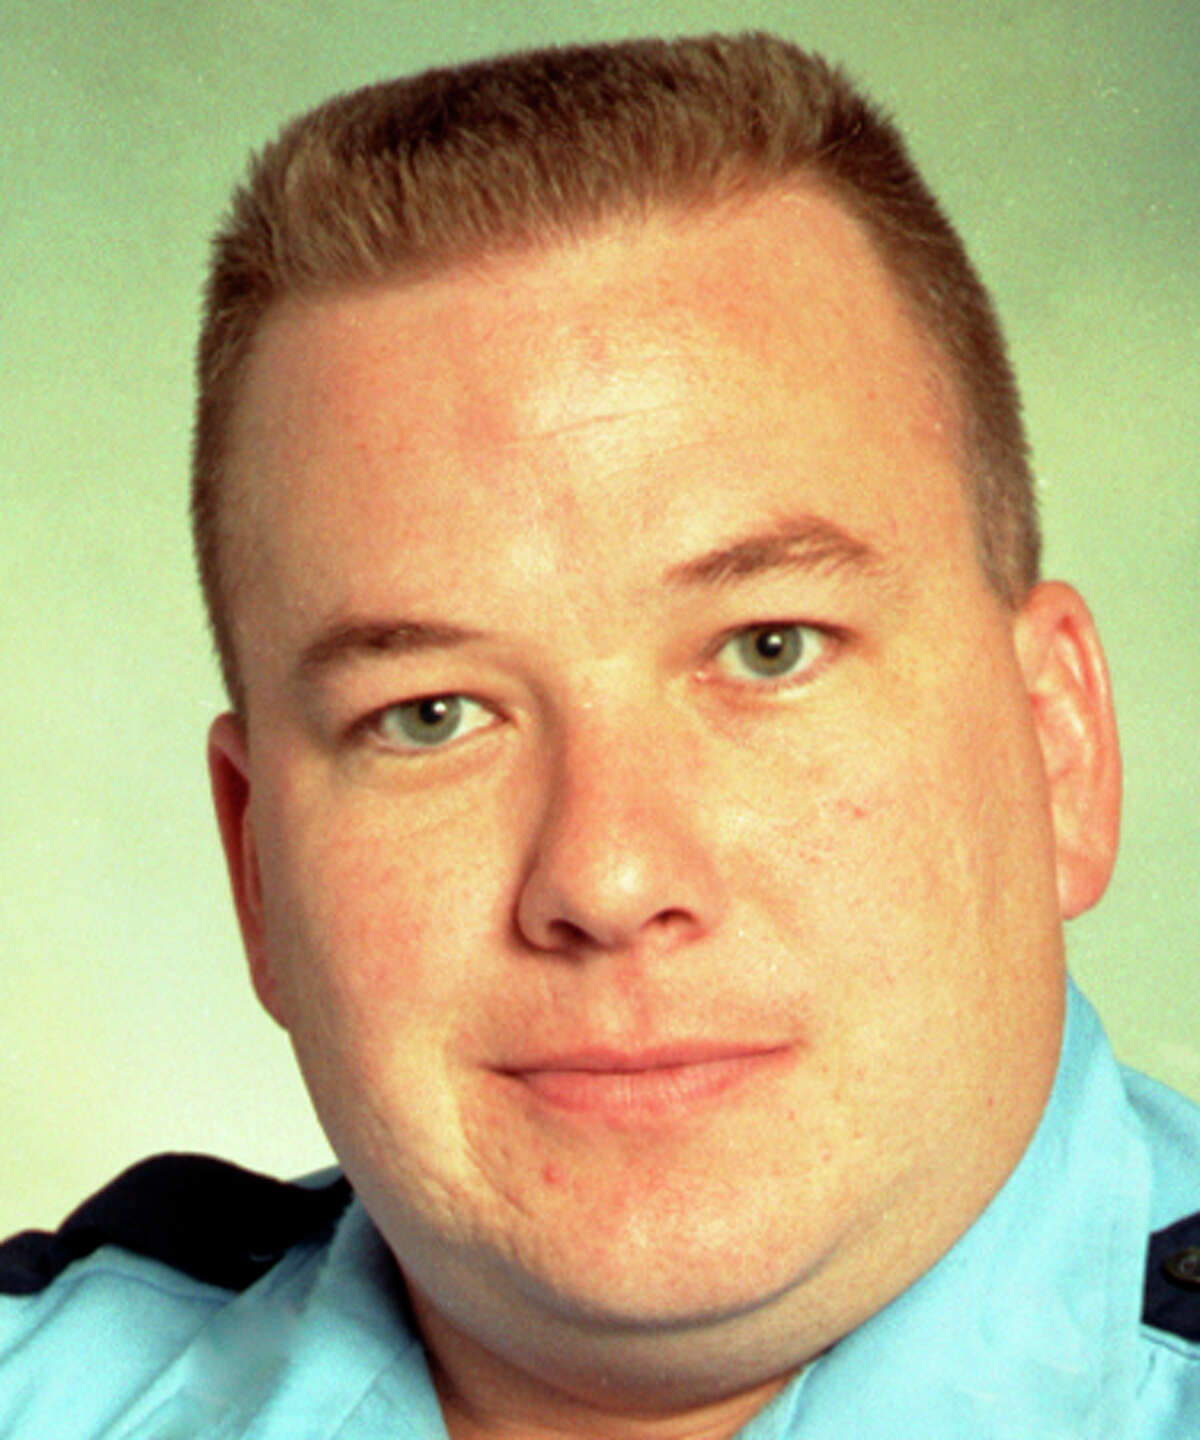 Calley served as a Houston police officer for 25 years.